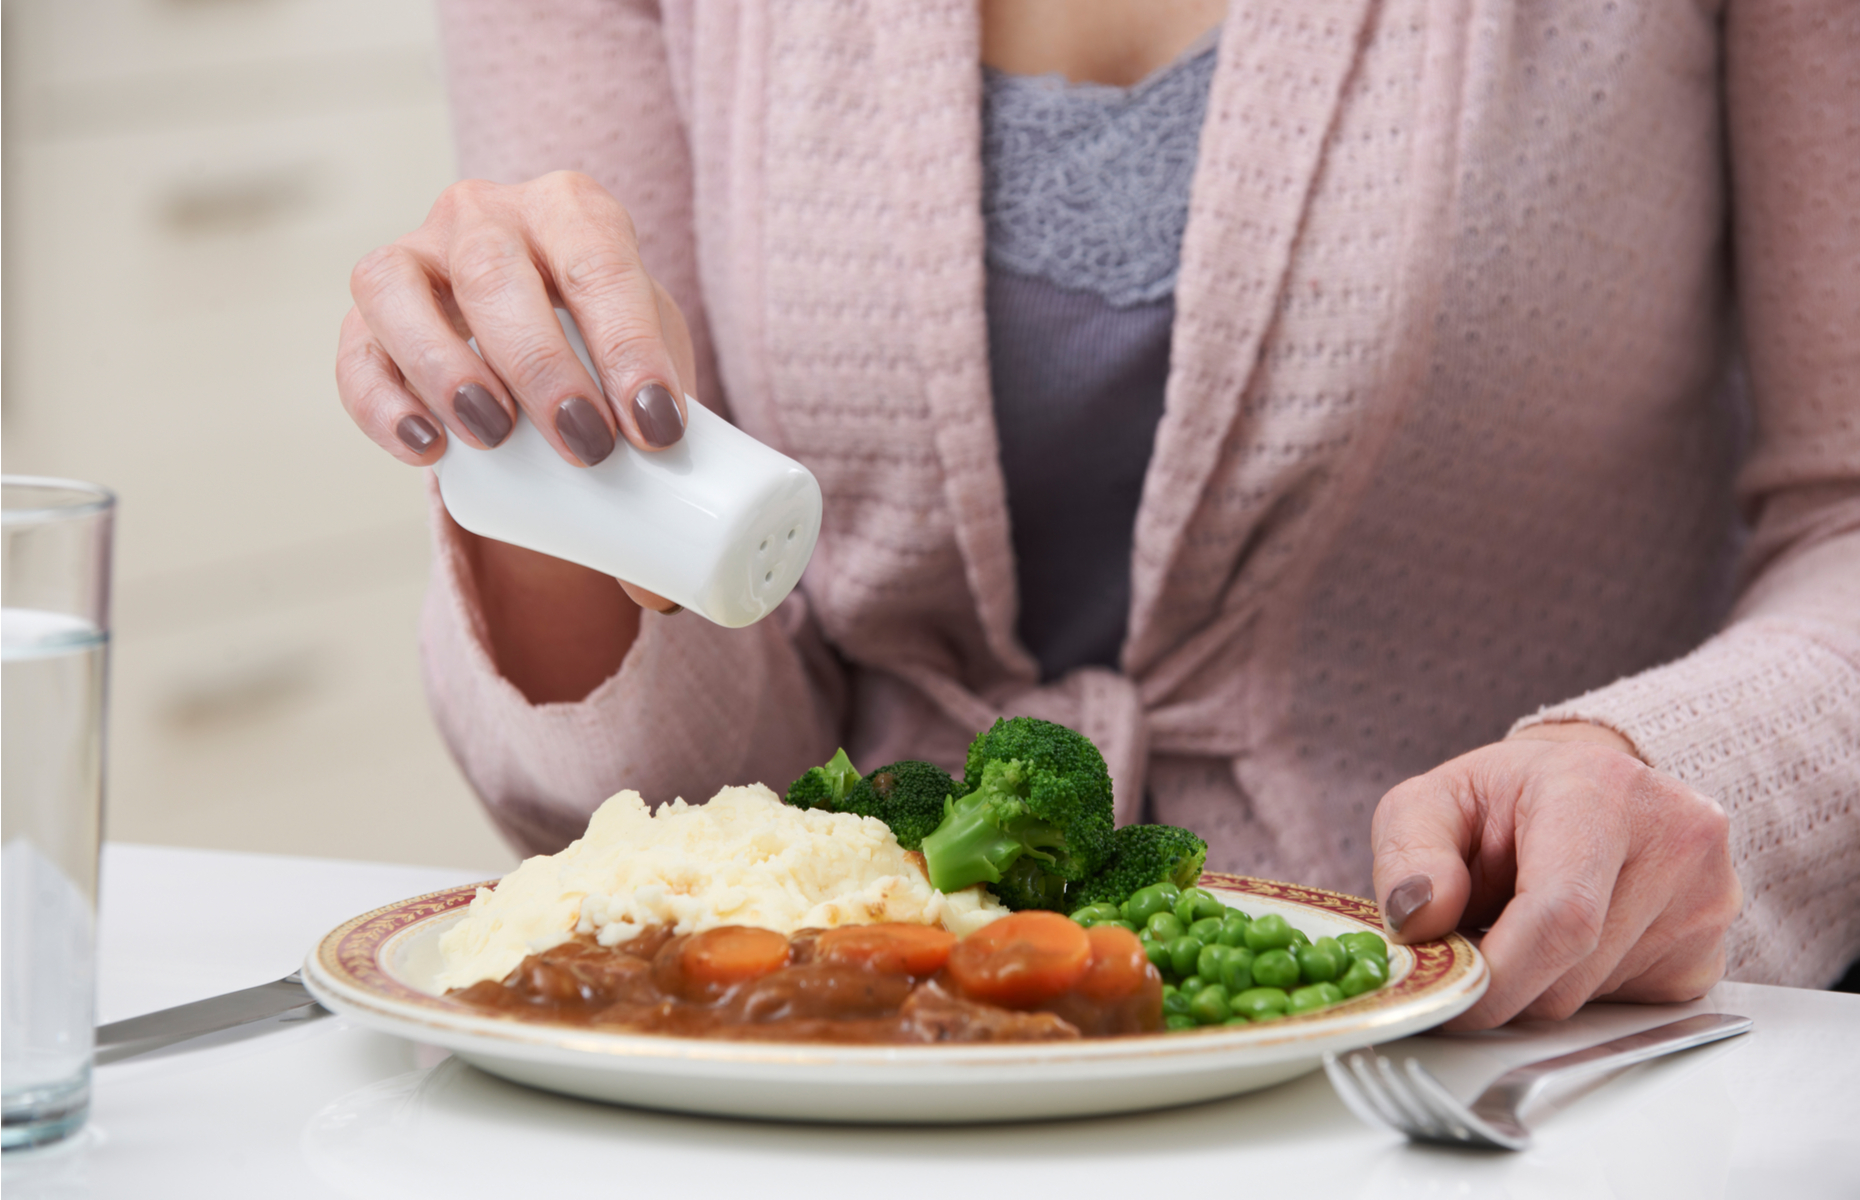 <p>People who salt their food too much may eventually cause their taste buds to develop a sort of <a href="https://www.ndtv.com/health/consuming-too-much-salt-could-be-harmful-6-signs-that-you-are-consuming-too-much-salt-1873365" rel="noreferrer noopener">sodium resistance.</a> To get their meals to taste better, they practically have to empty the salt shaker onto their food.</p><p>Someone who has lost their sensitivity to salt constantly increases their daily consumption and, as a result, the risks to their health, trapping themselves in a vicious cycle.</p>